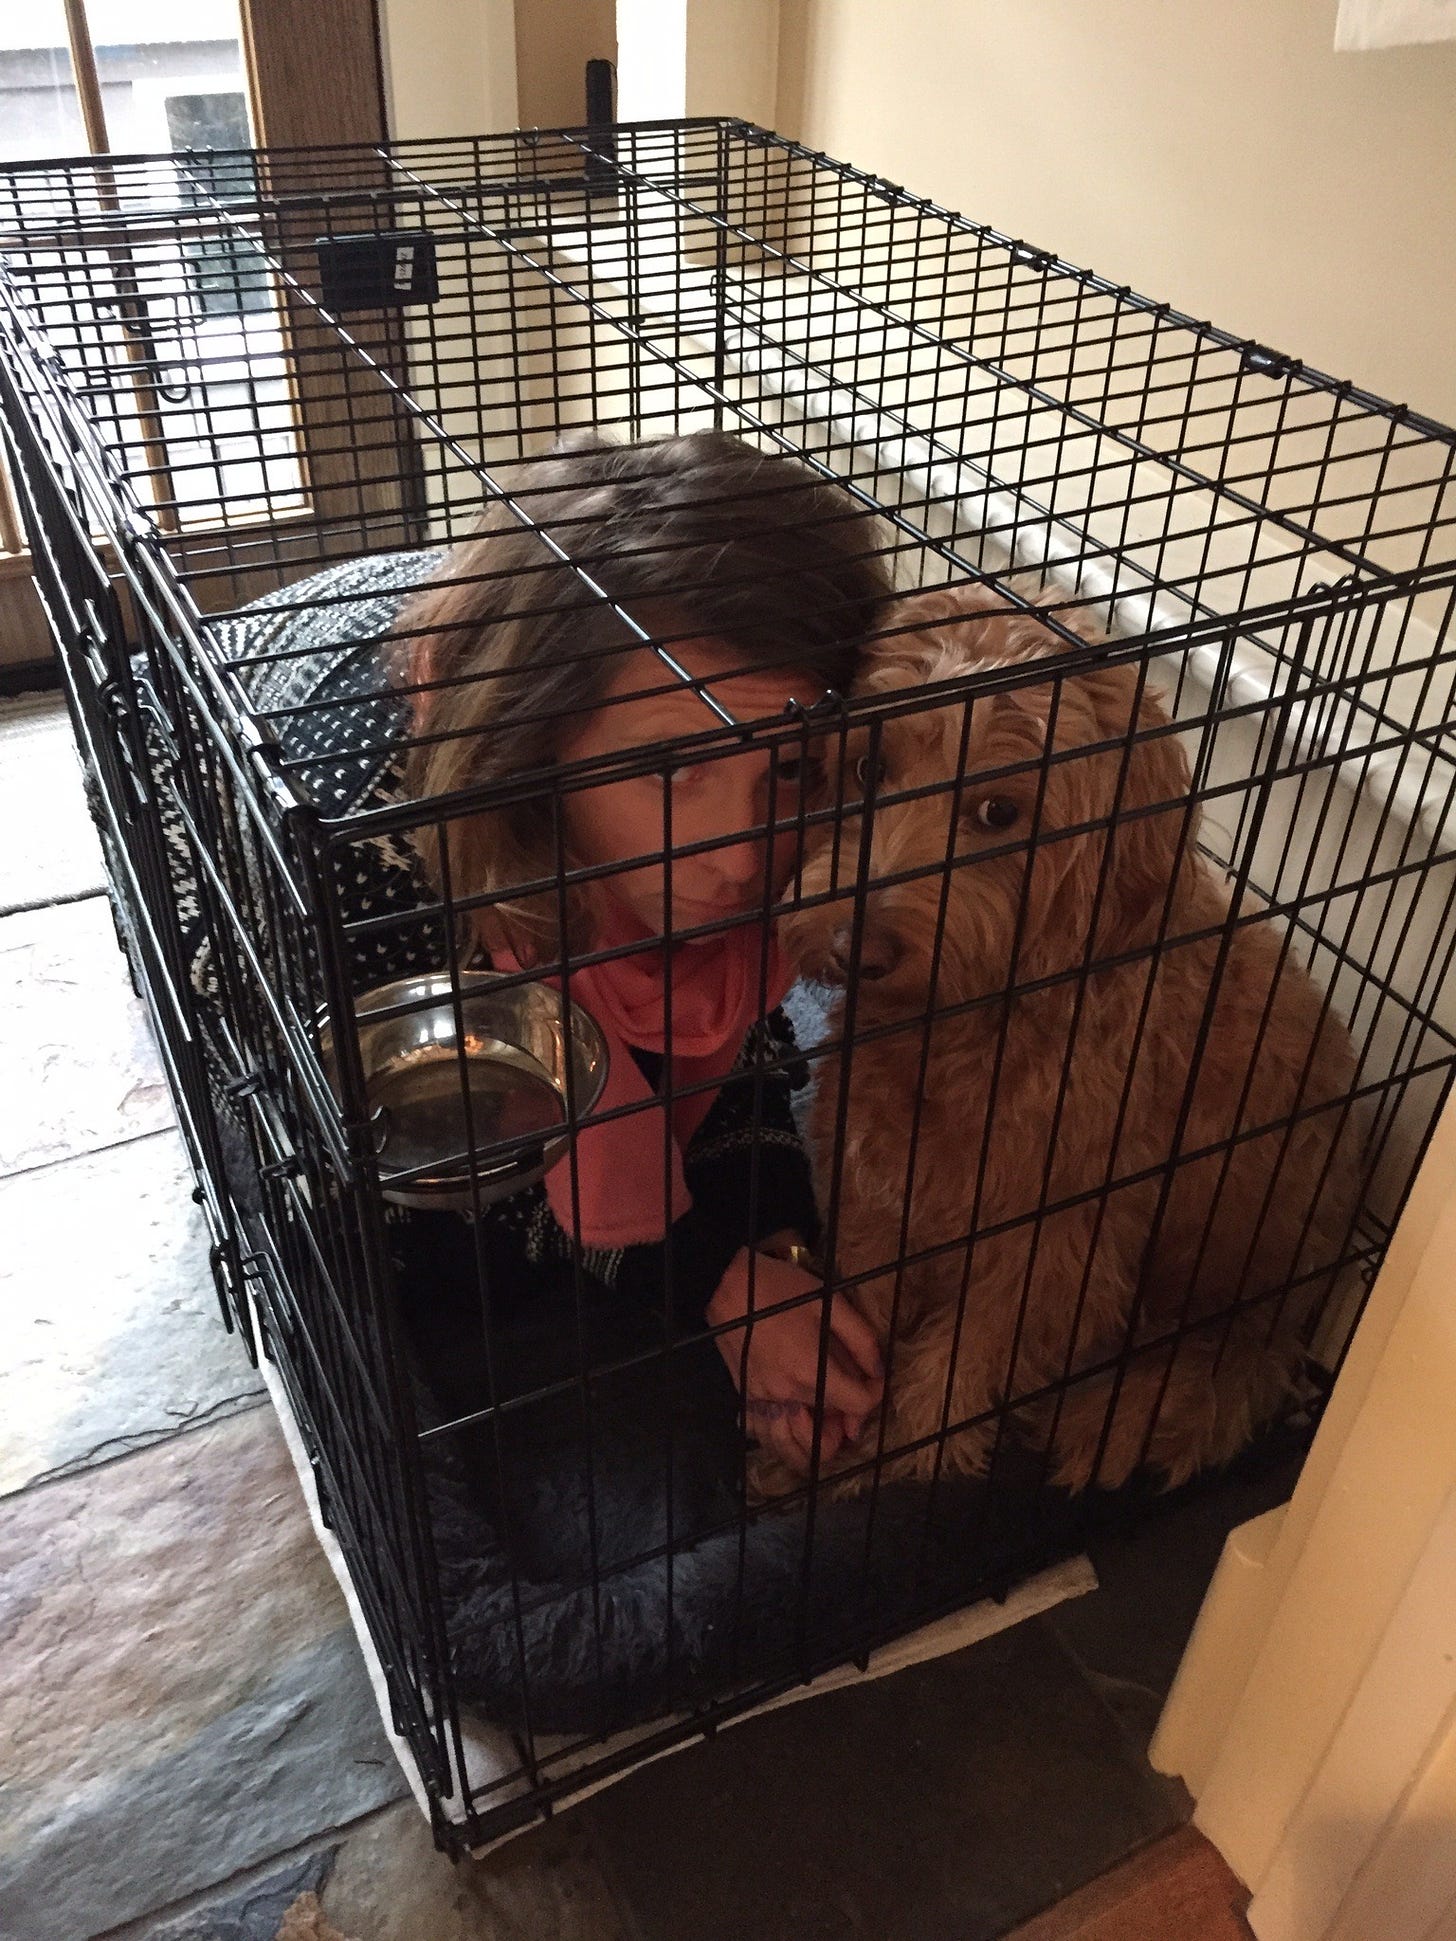 Woman in a dog crate with a dog.